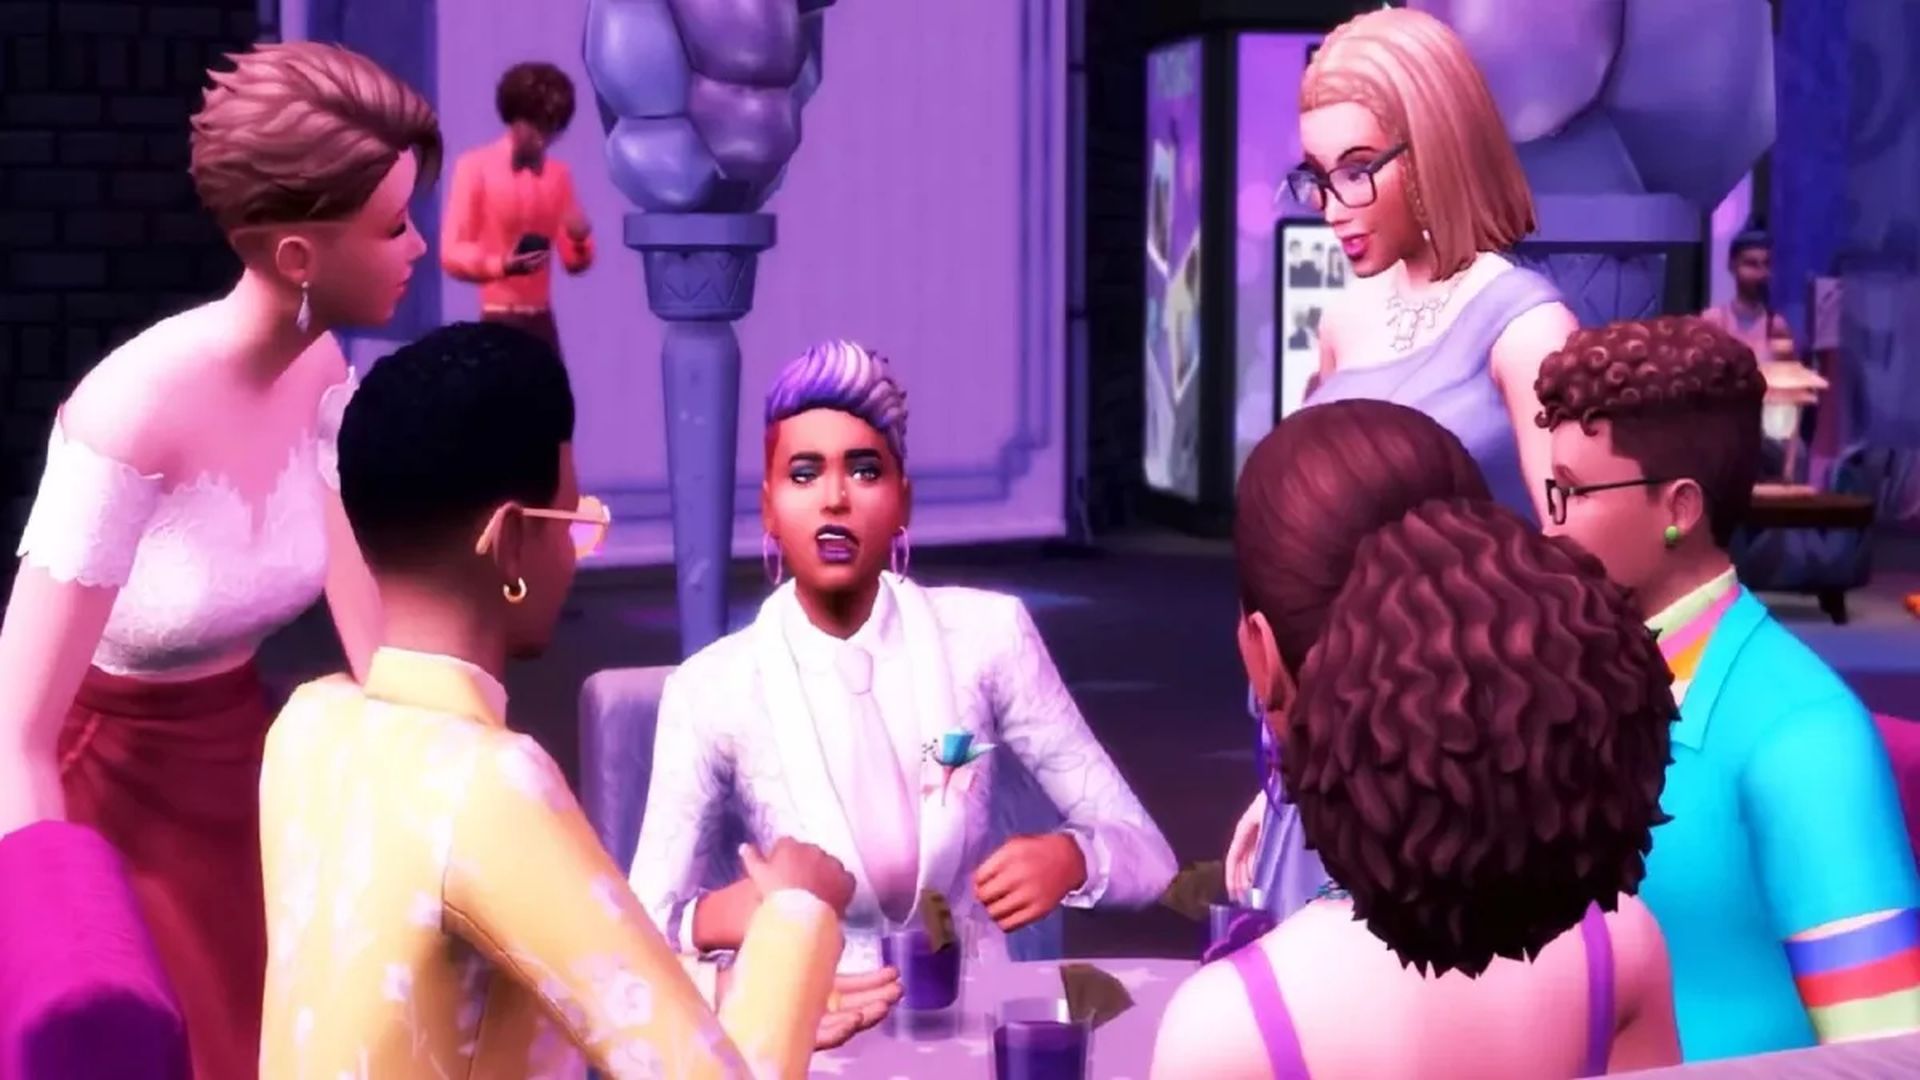 How to be a Sims 4 prom king/queen?